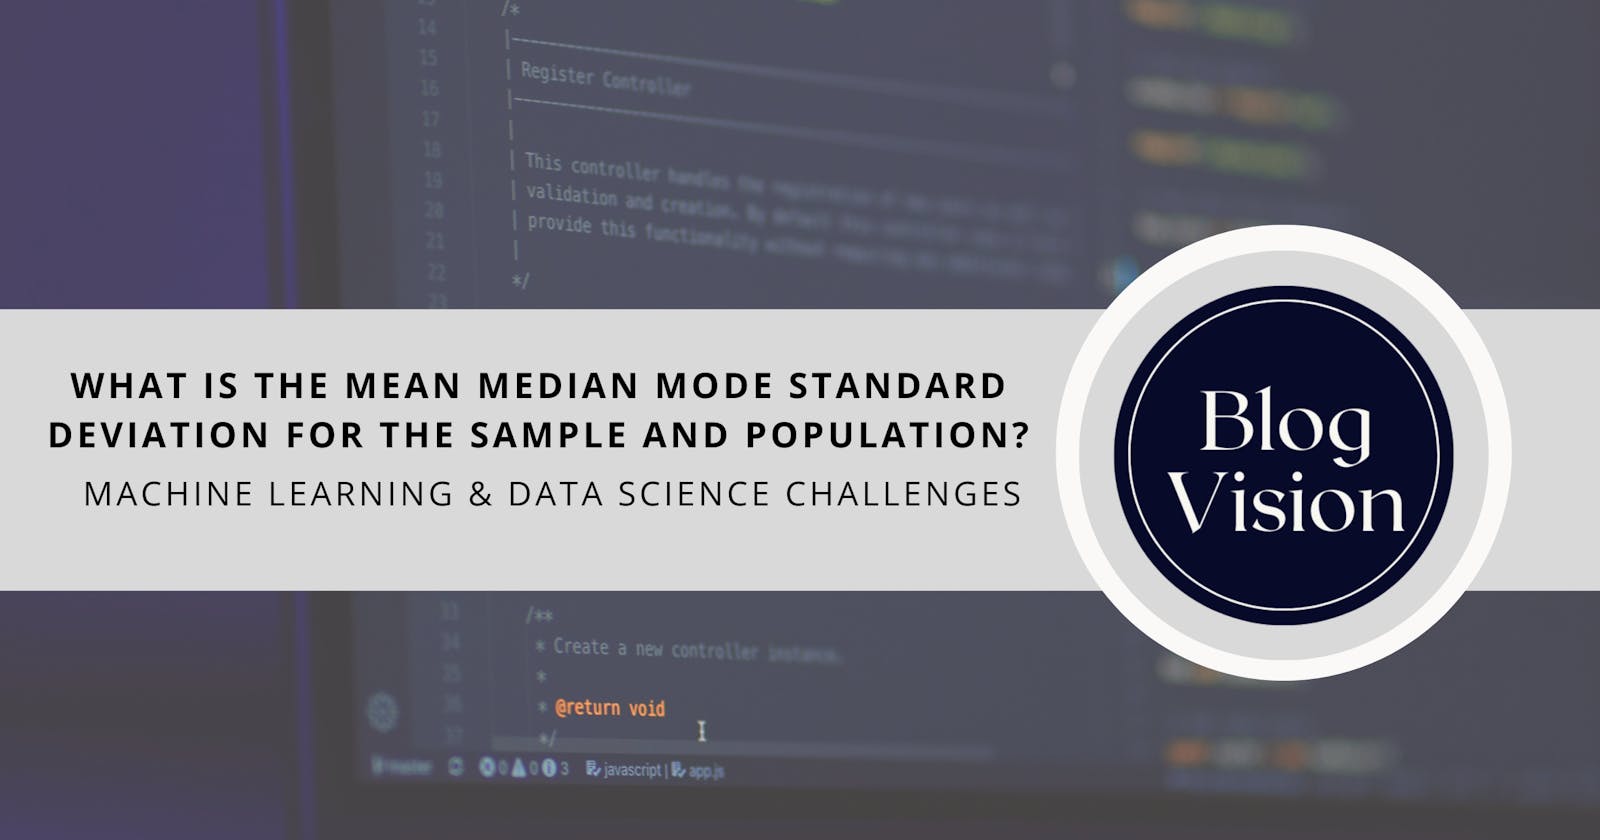 #43 Machine Learning & Data Science Challenge 43